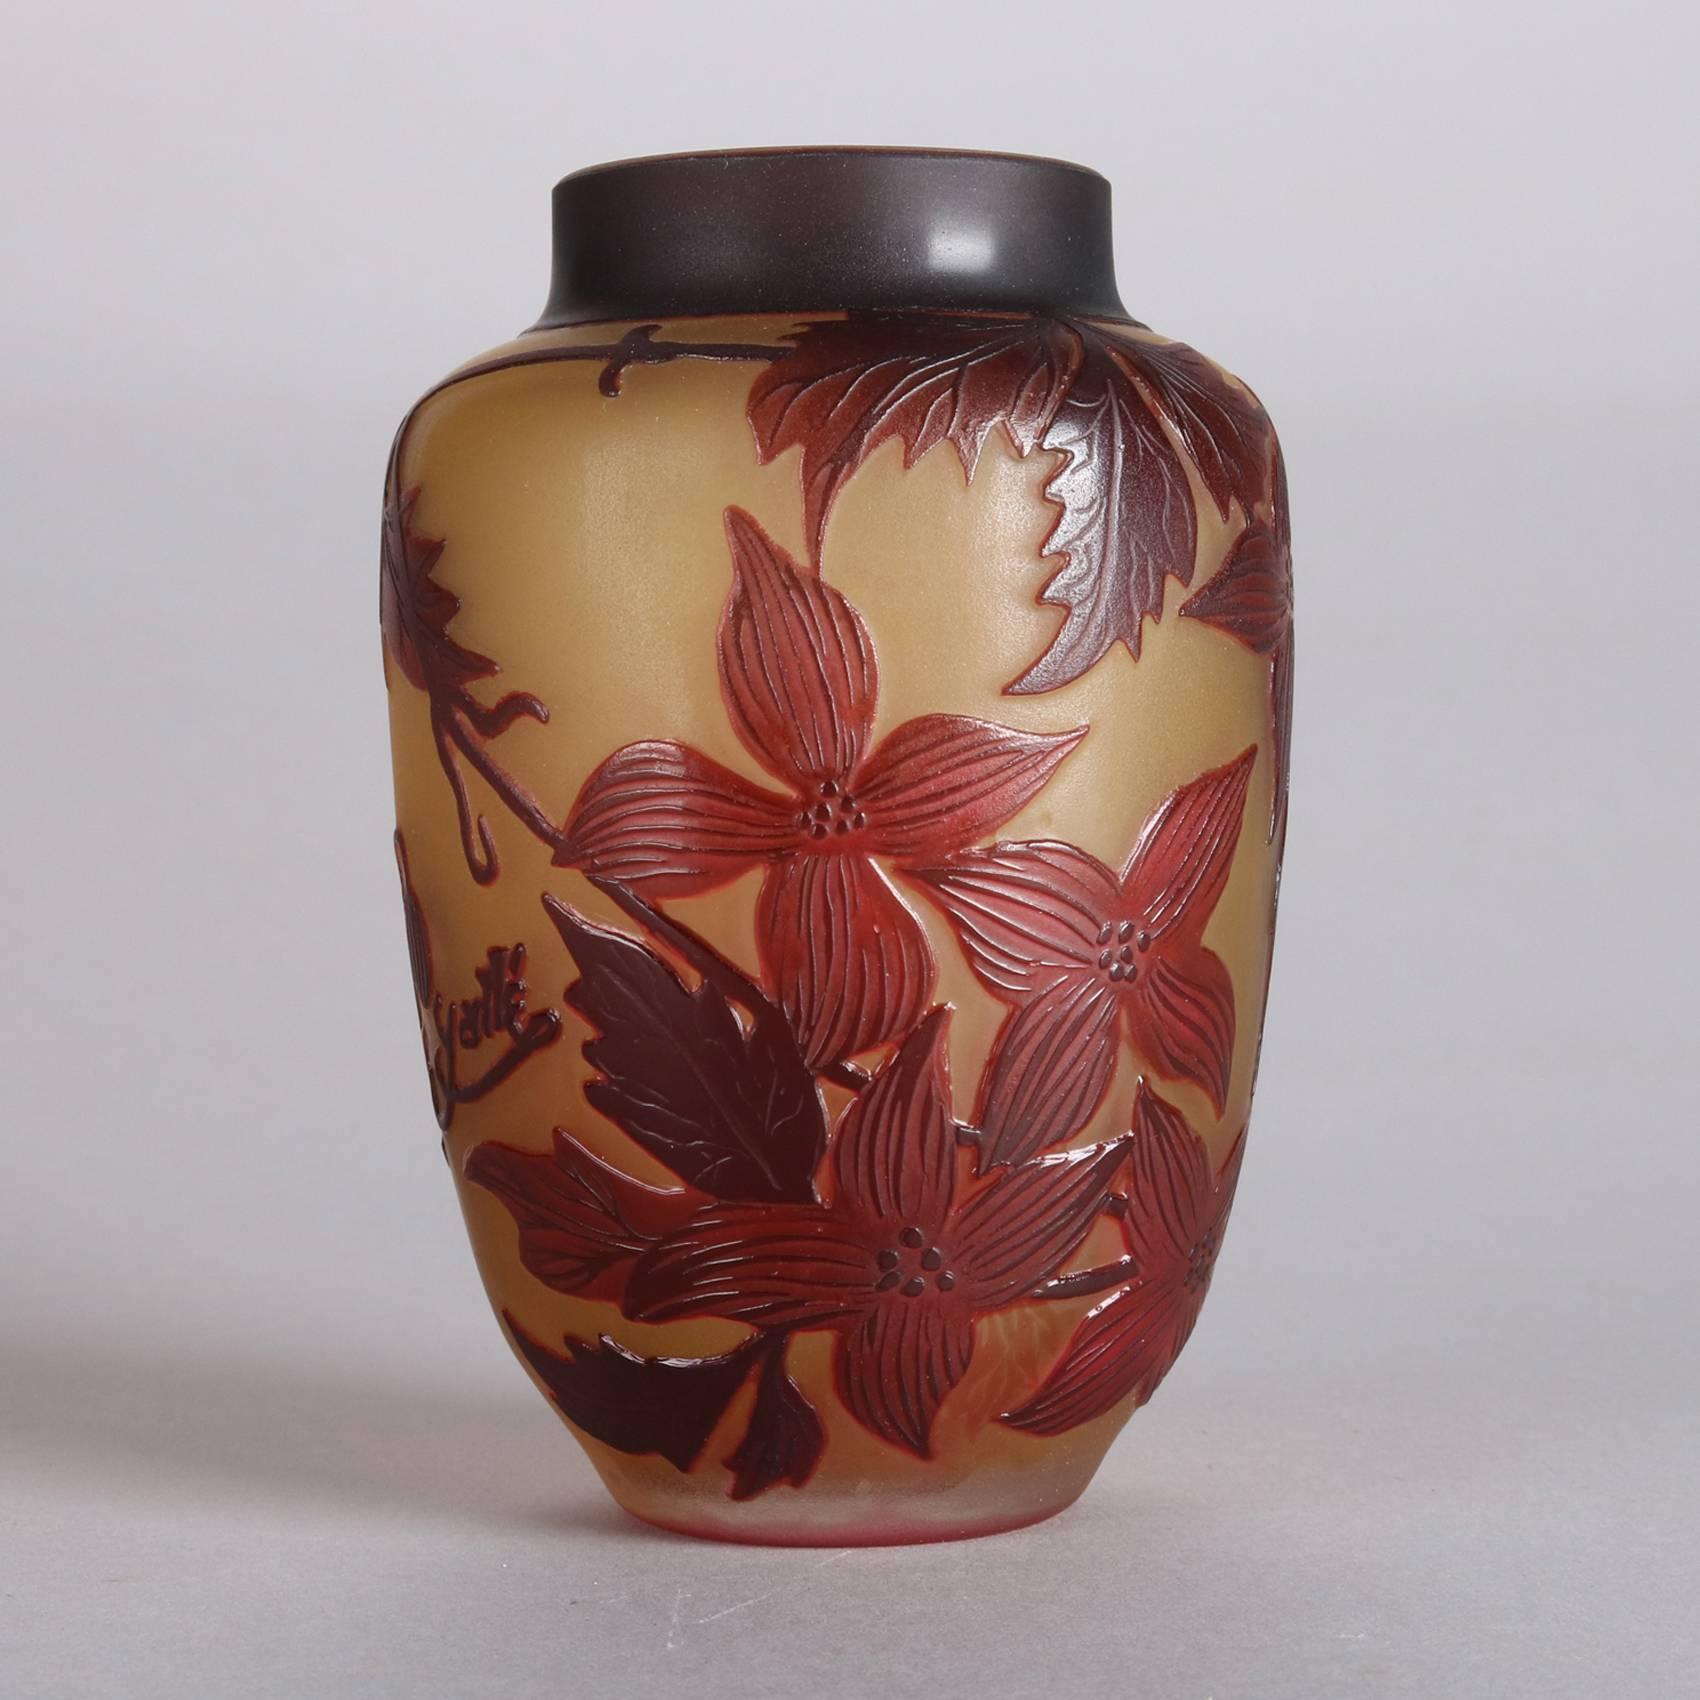 Art Nouveau French cameo cabinet vase by Galle features cut back clematis floral design, signed Galle, 20th century.

Measures: 5